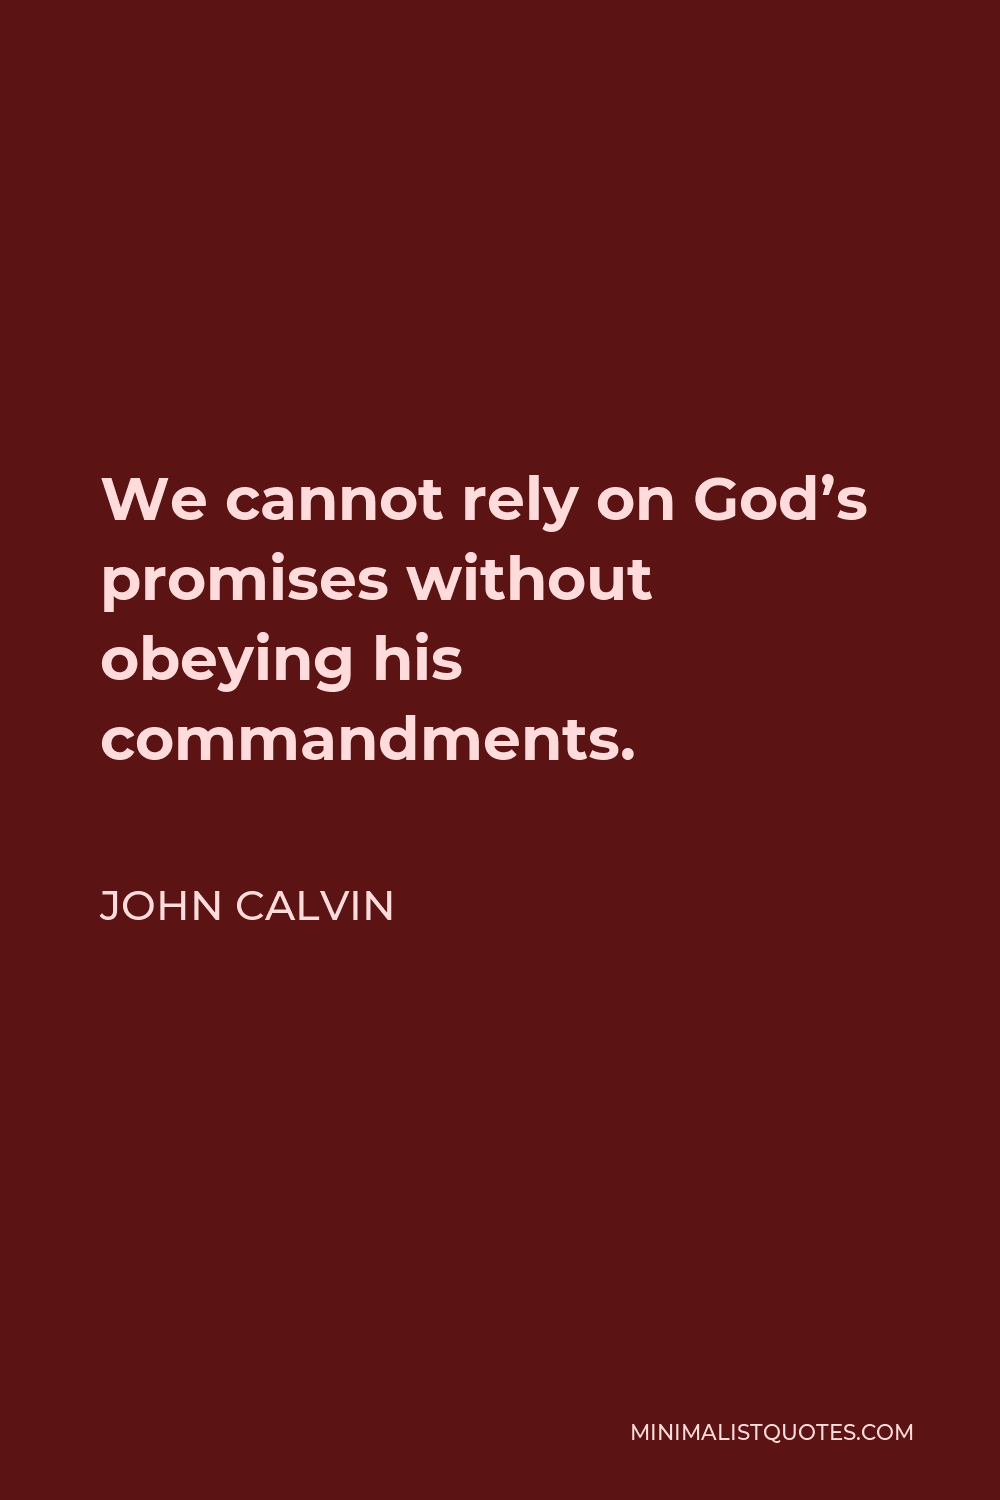 John Calvin Quote - We cannot rely on God’s promises without obeying his commandments.